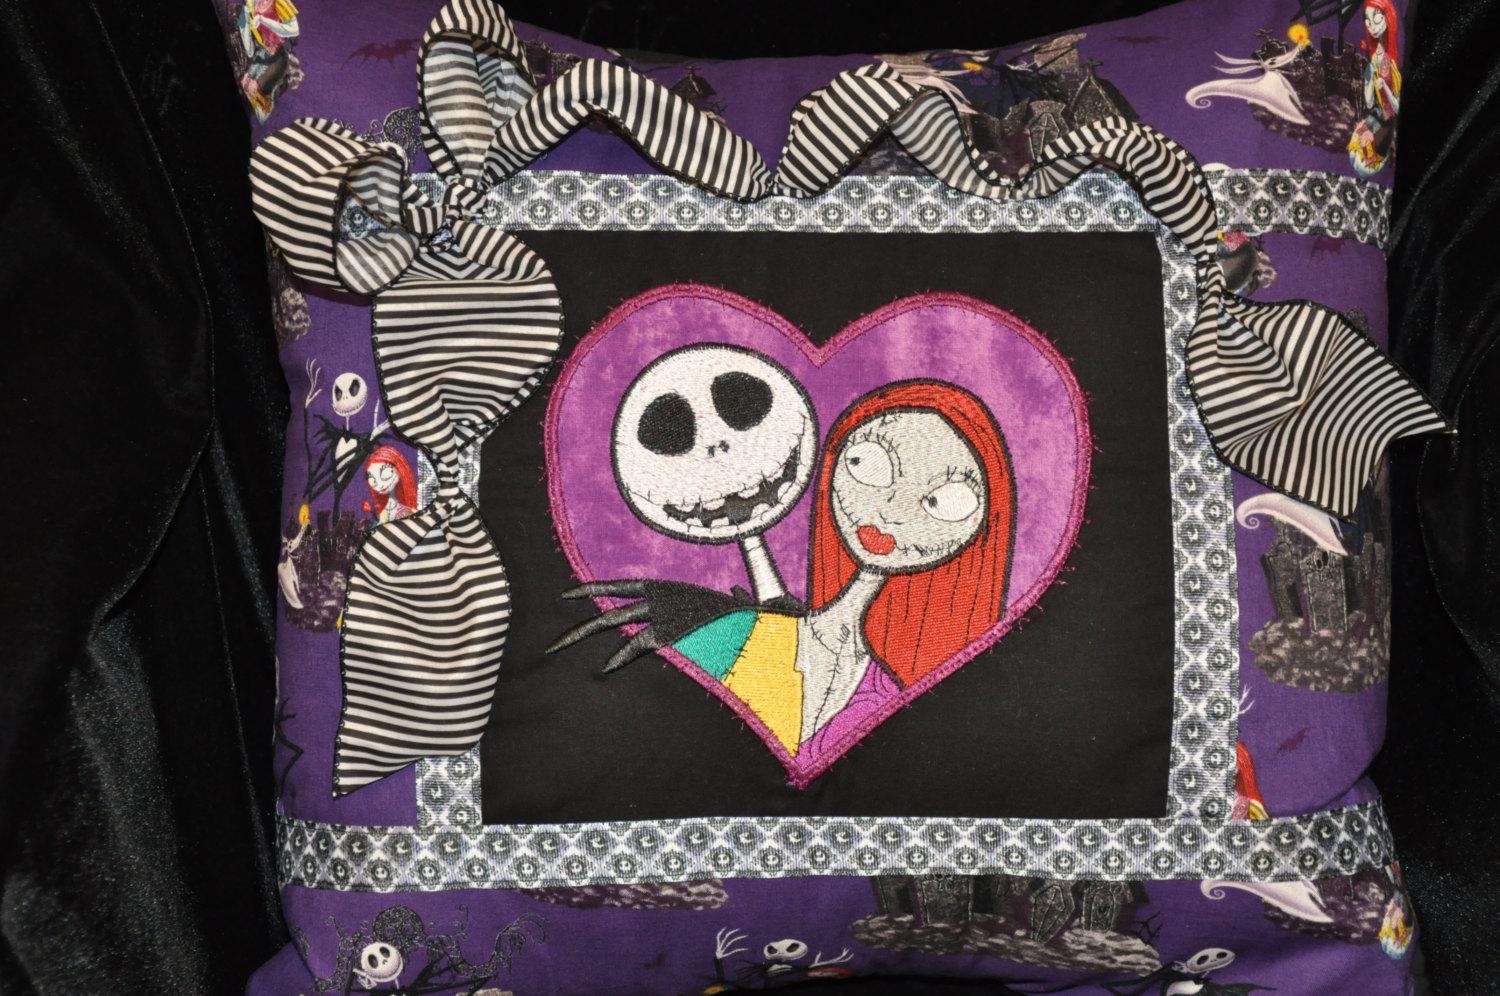 Nightmare Before Christmas pillow with a bow embroidered at pillow